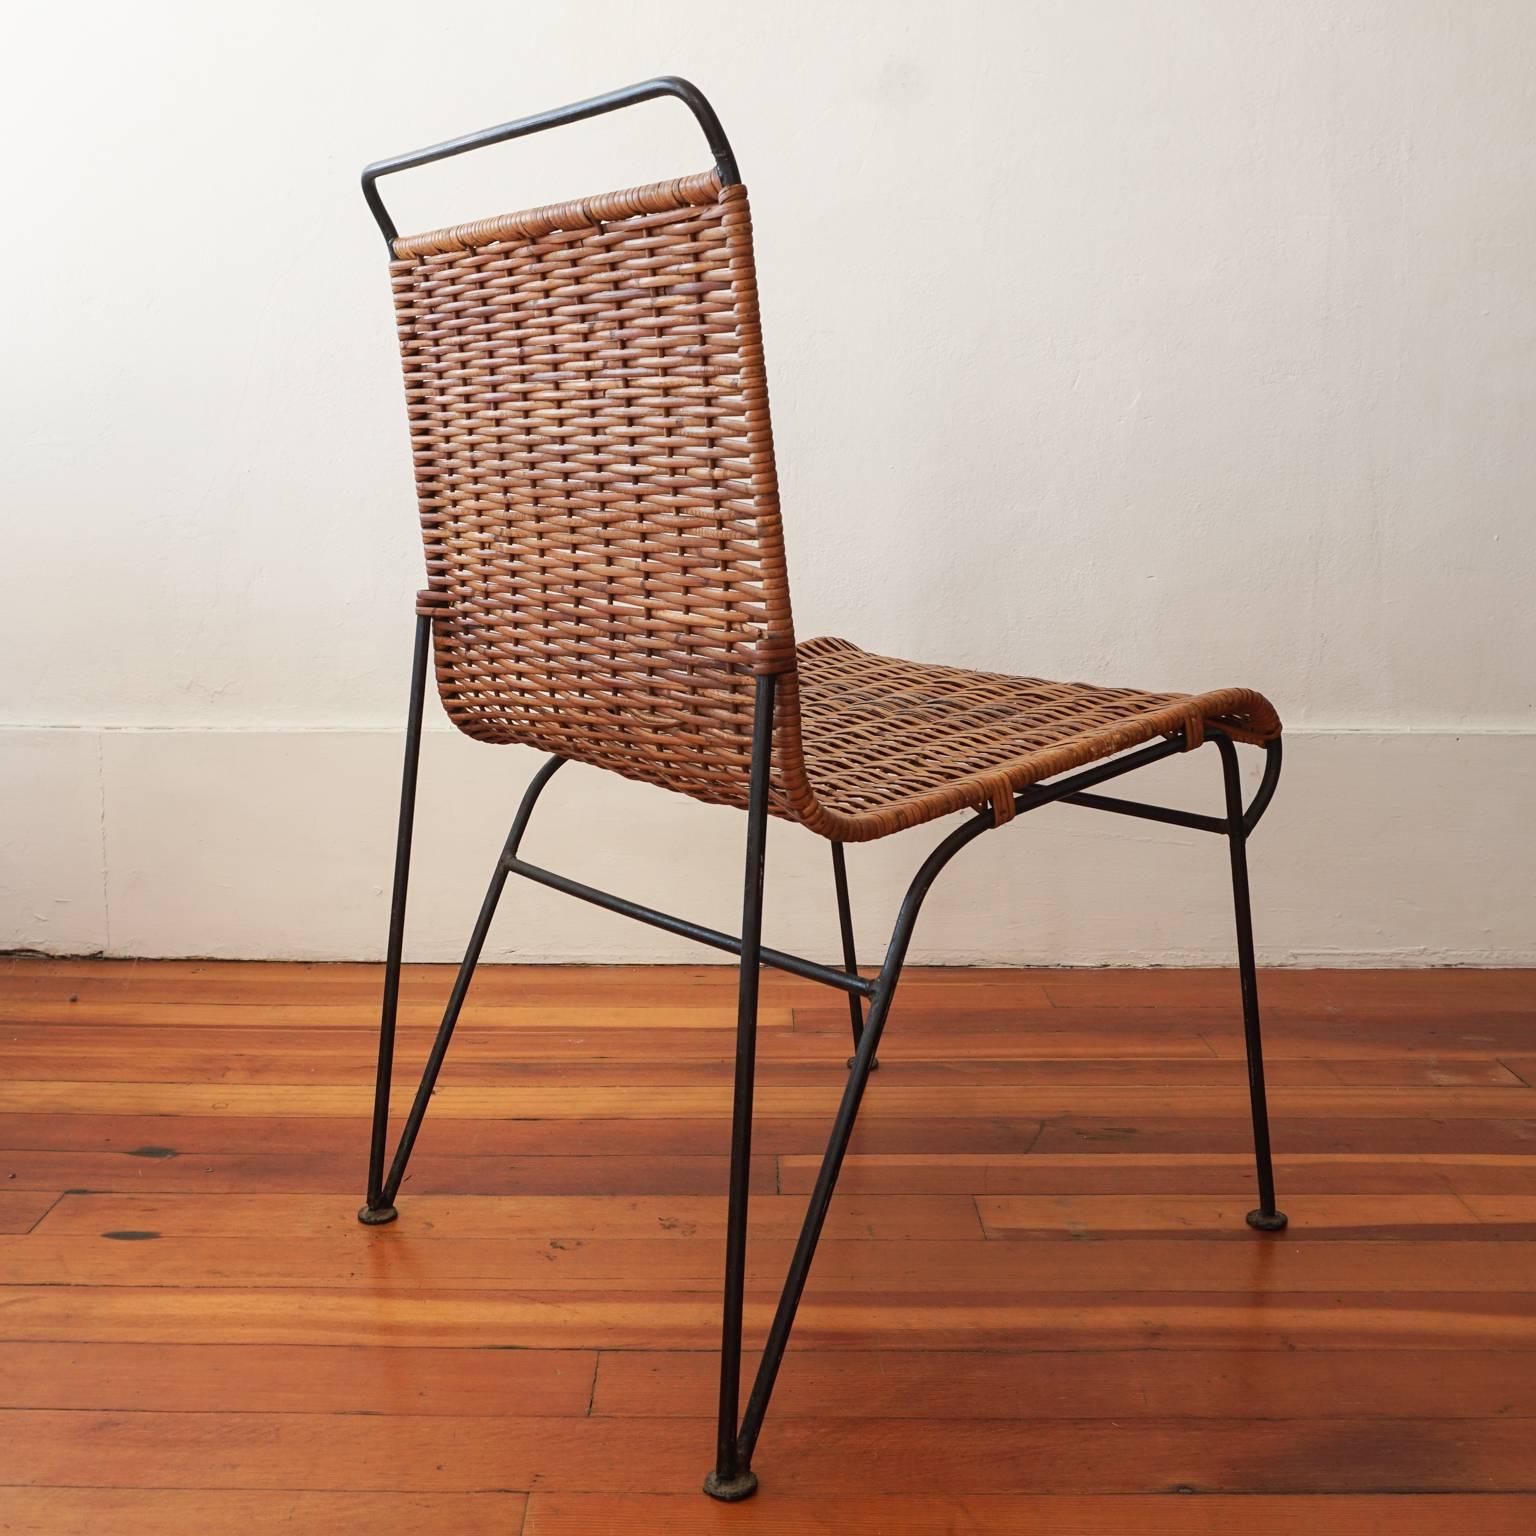 American Pipsan Saarinen Swanson Iron and Cane Chair for Ficks Reed, 1950s